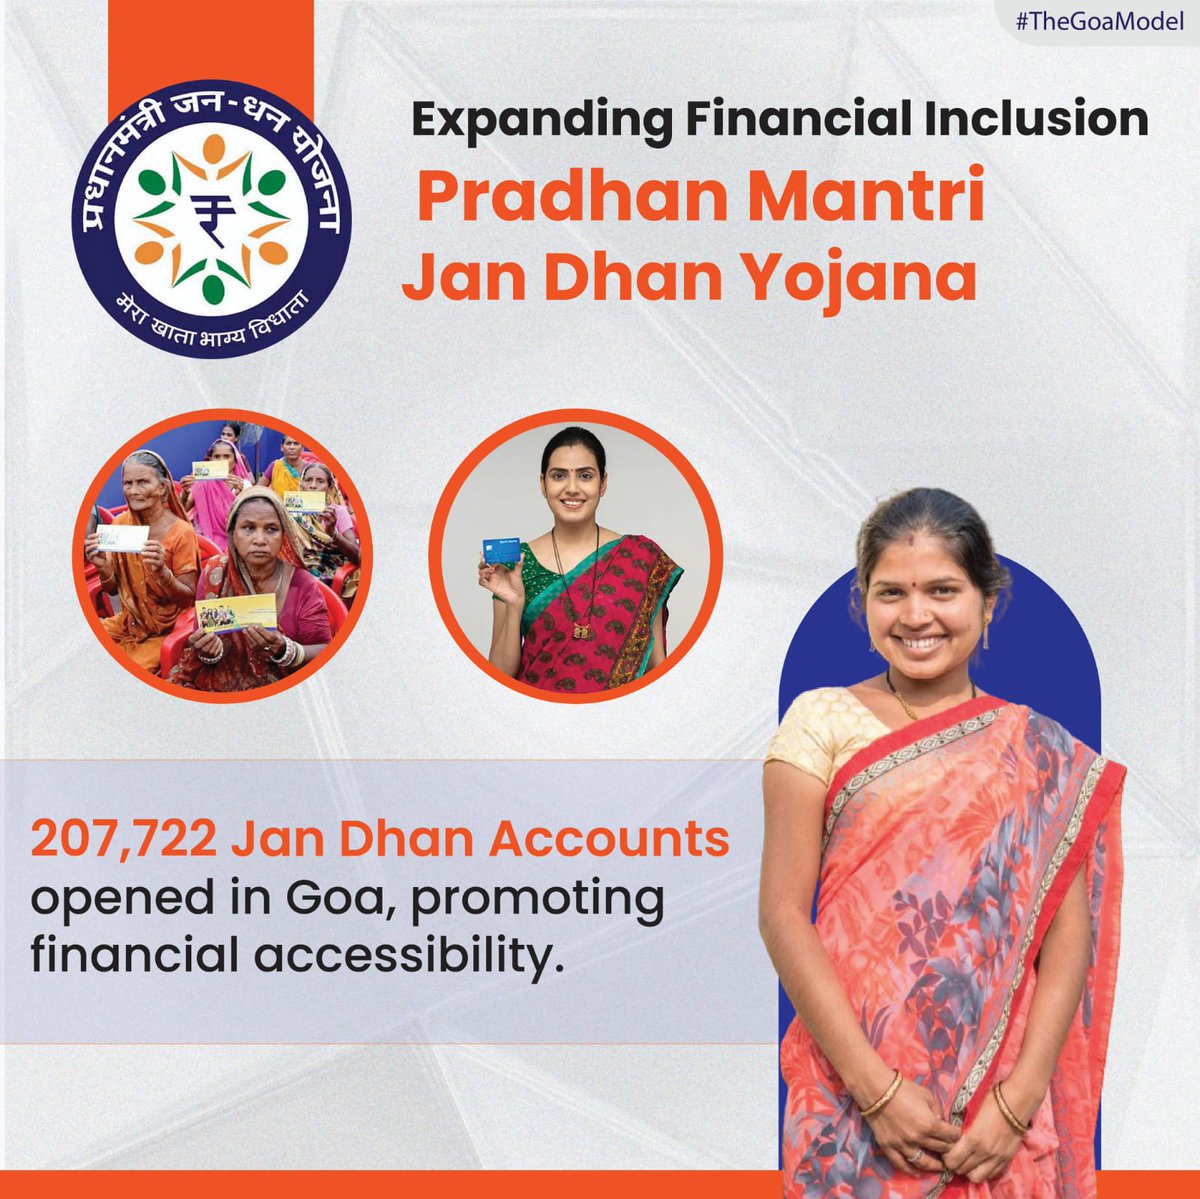 Financial inclusion thrives with Pradhan Mantri Jan Dhan Yojana! Goa sees 207,722 accounts opened, connecting more residents to banking services. A step towards economic empowerment and financial accessibility.  #PMJDY #GoaFinance
#TheGoaModel #FinancialInclusion #JanDhanYojana